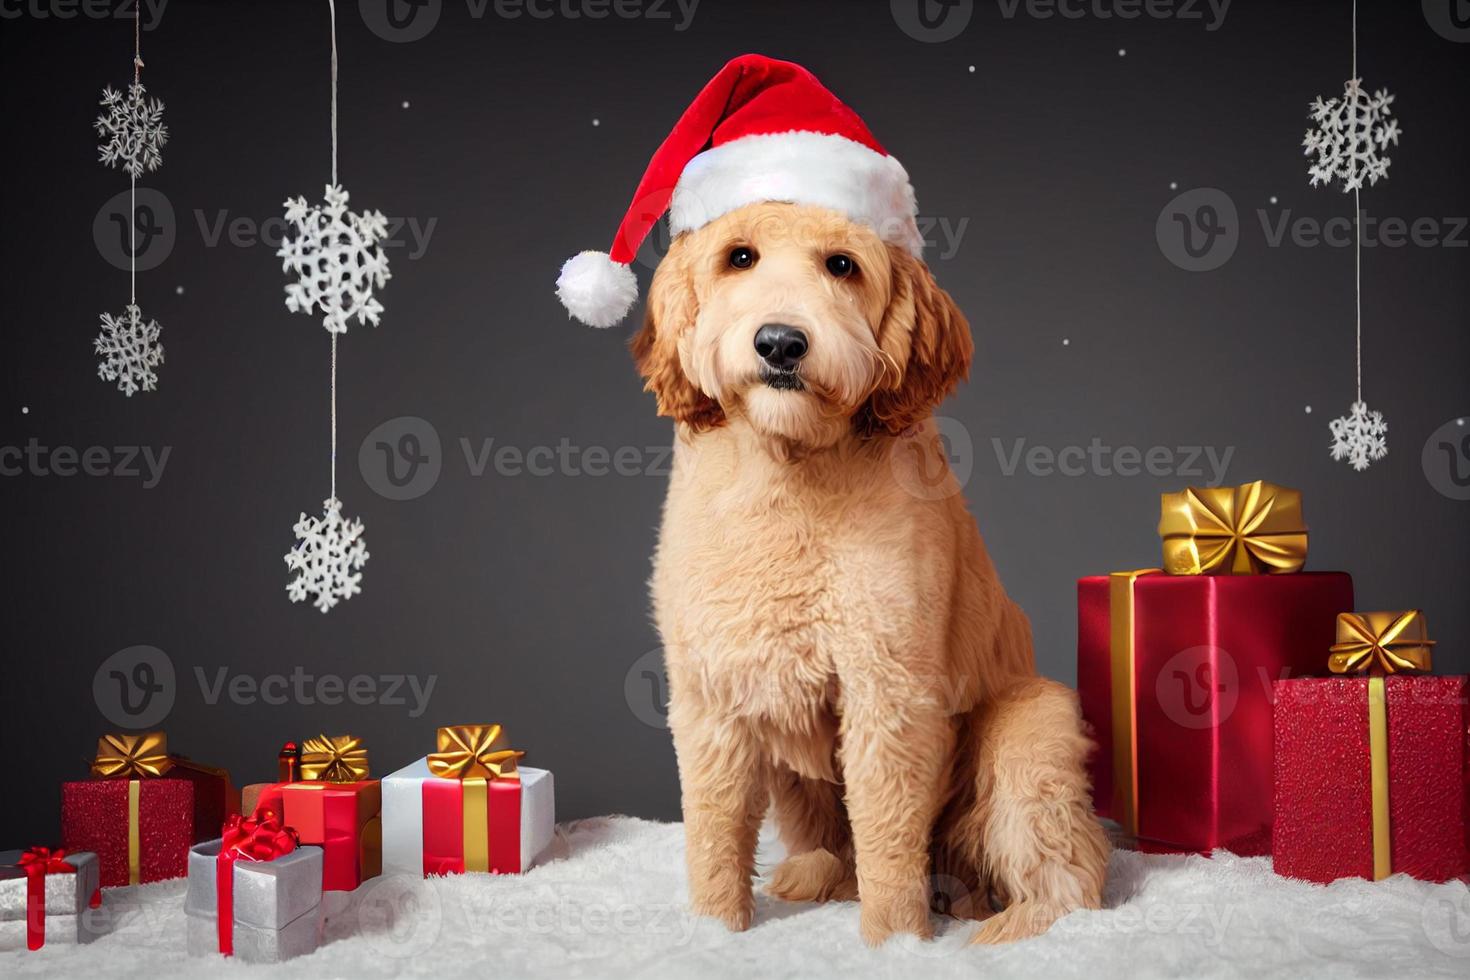 Adorable Goldendoodle dog with one Santa hat and Christmas decorations, cute photo